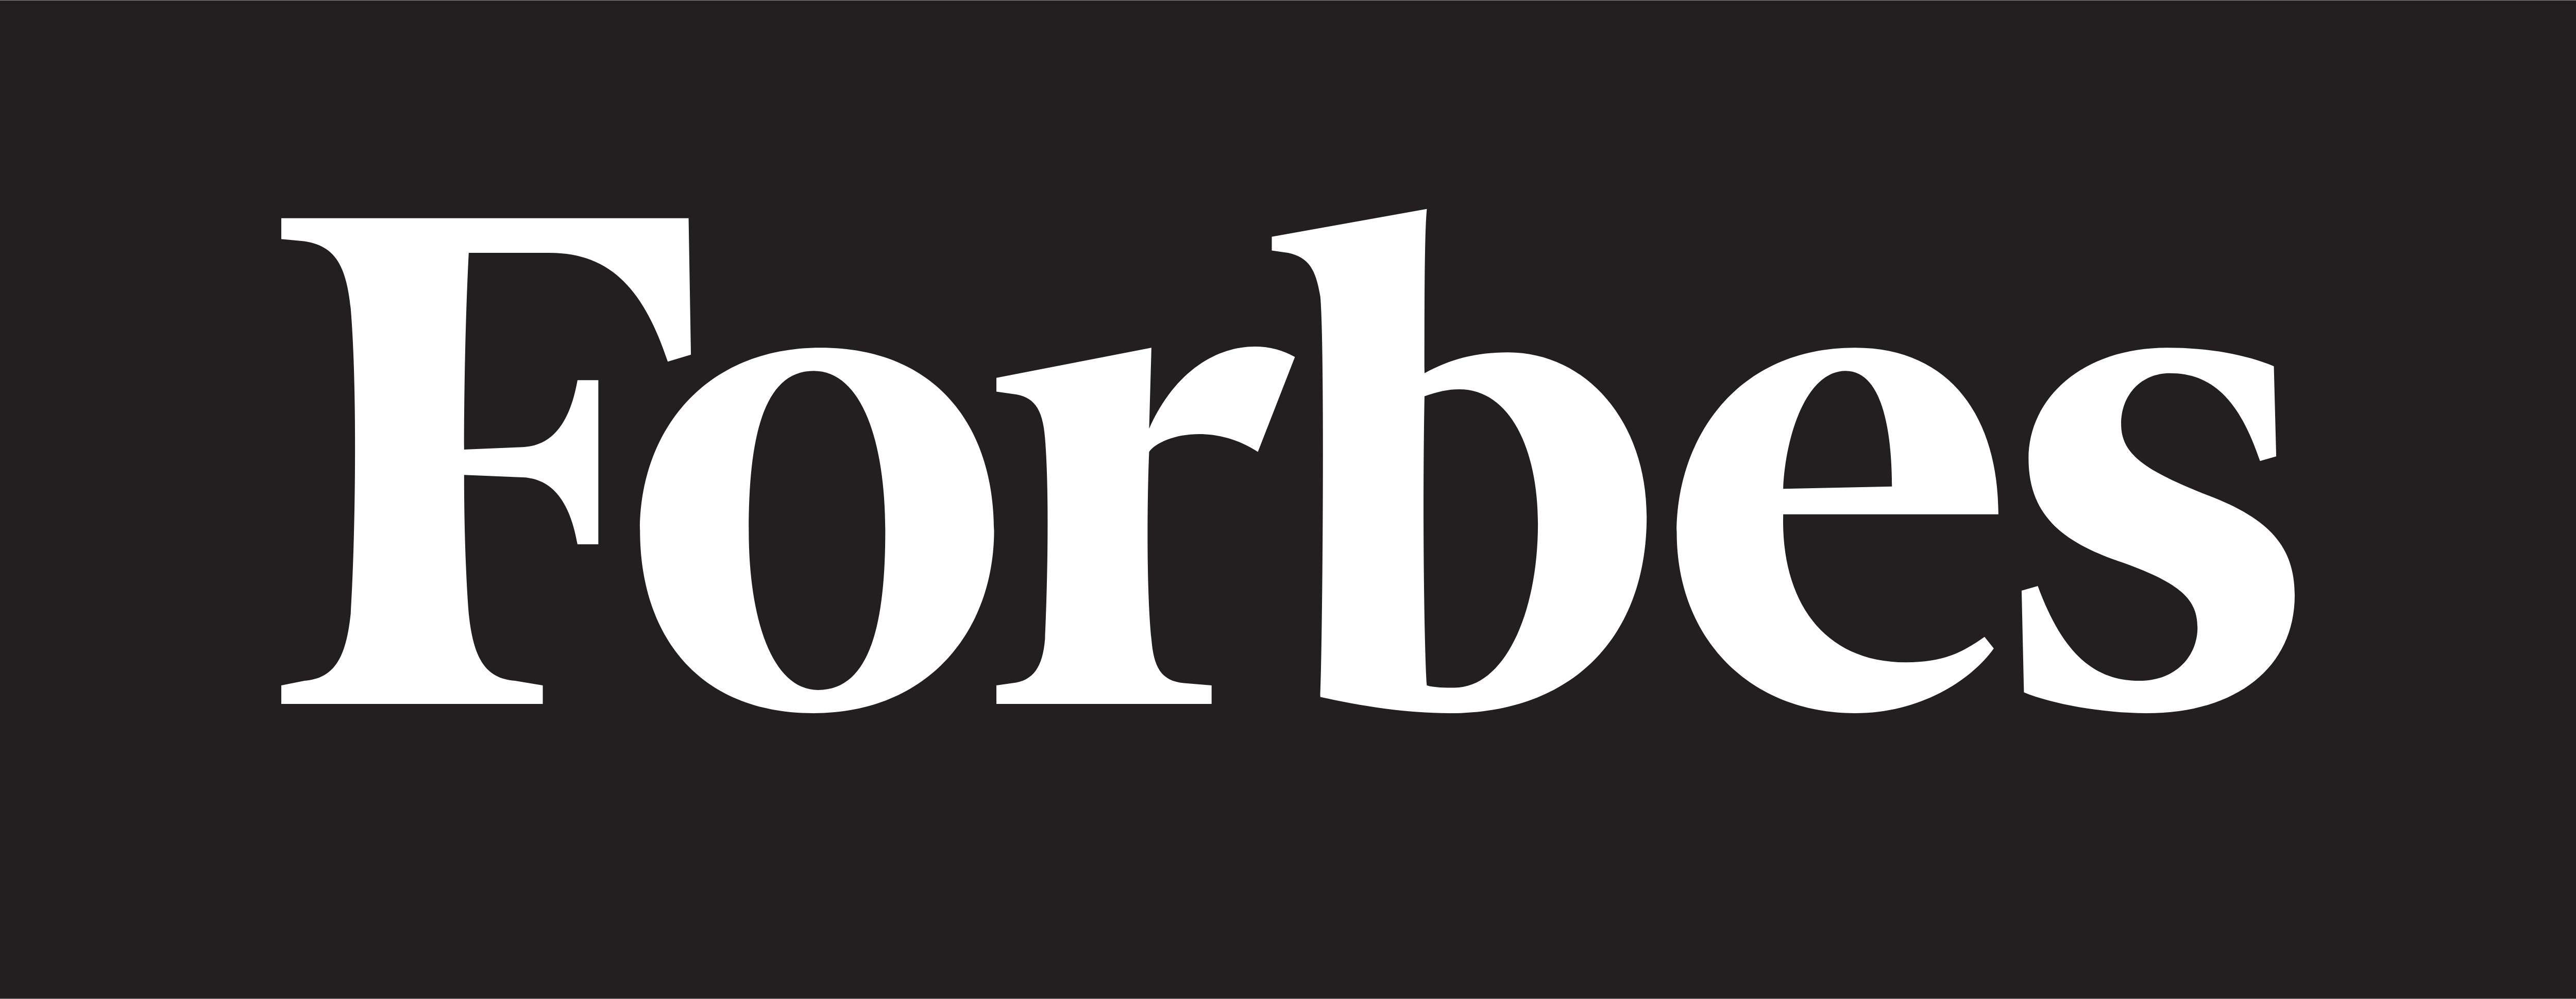 Forbes Logo PNG - 175667